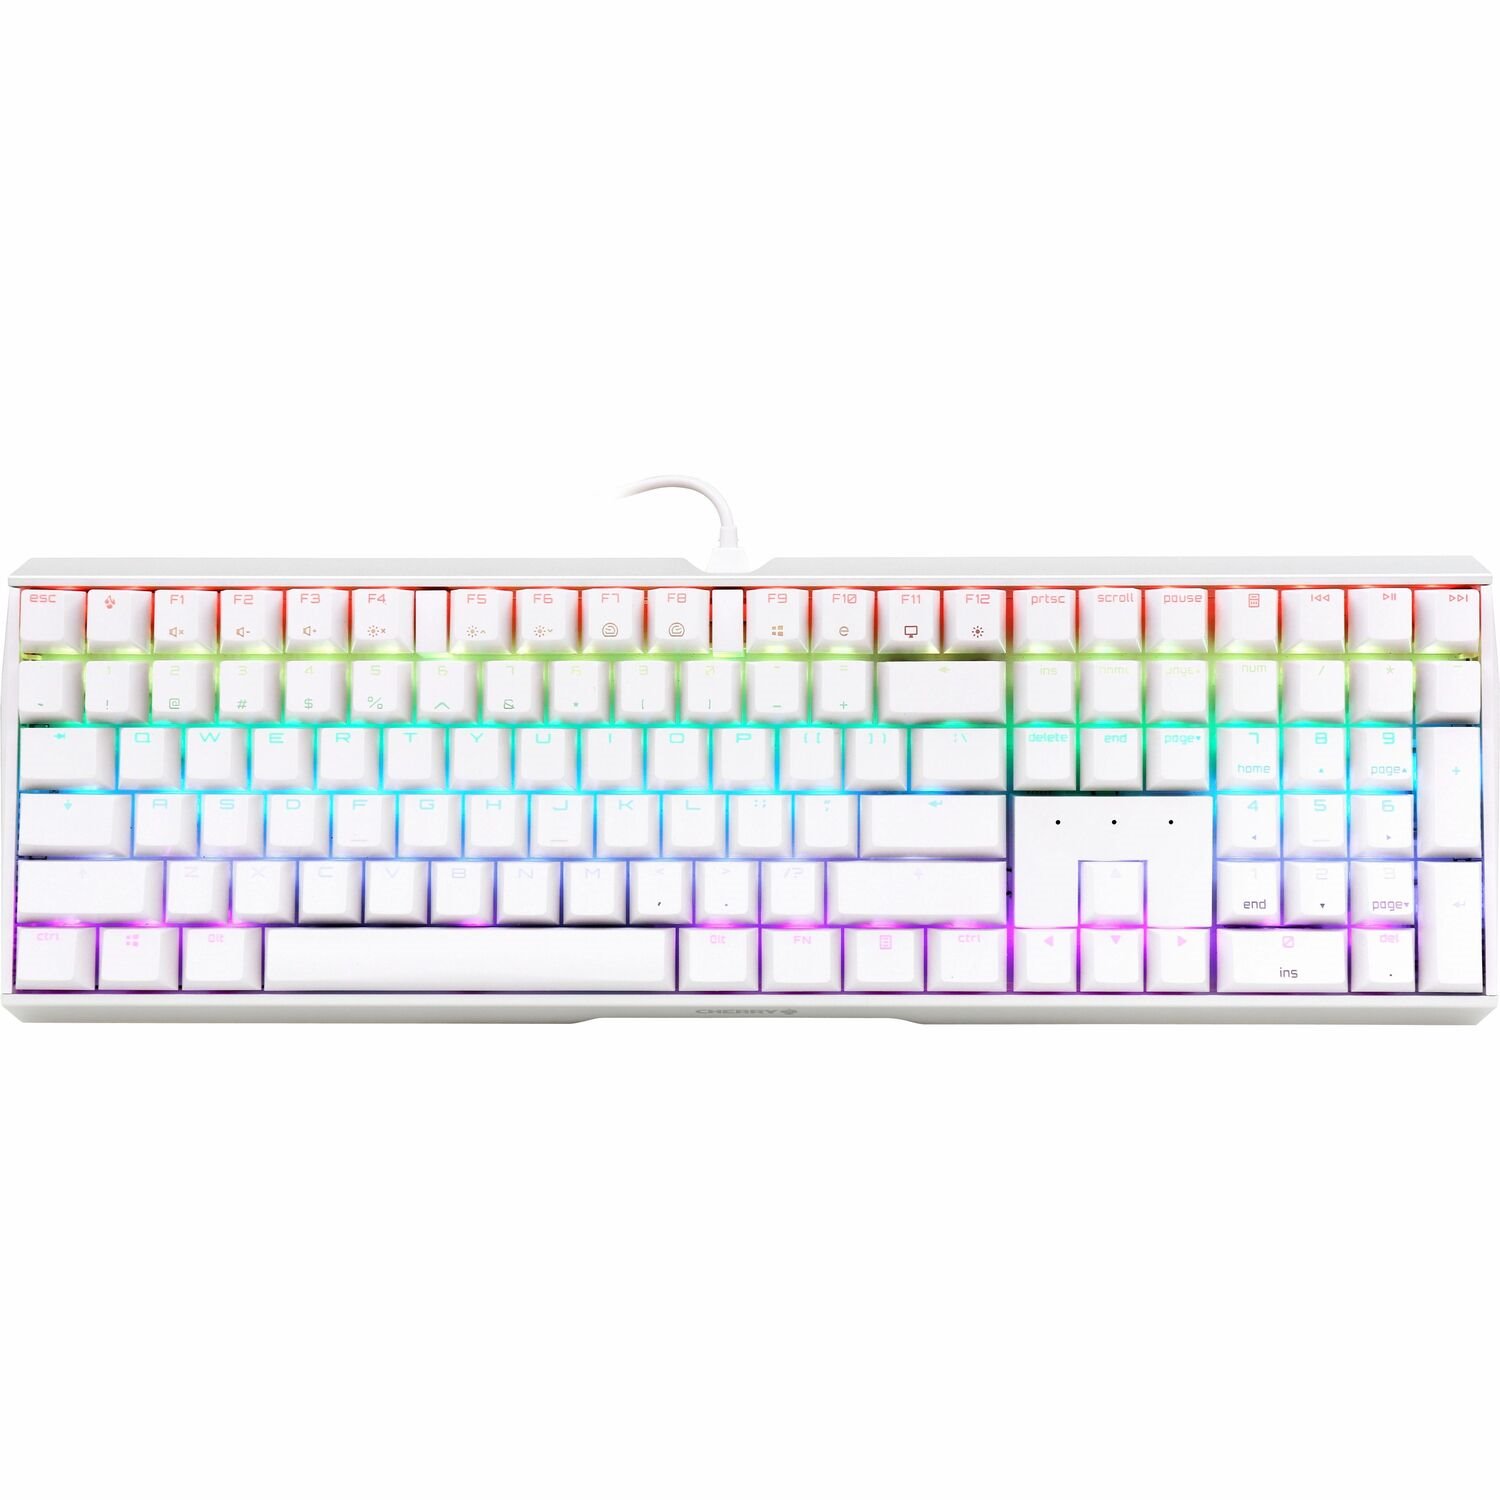 CHERRY MX 3.0S Wired RGB Keyboard, MX BROWN SWITCH, For Office And Gaming, White